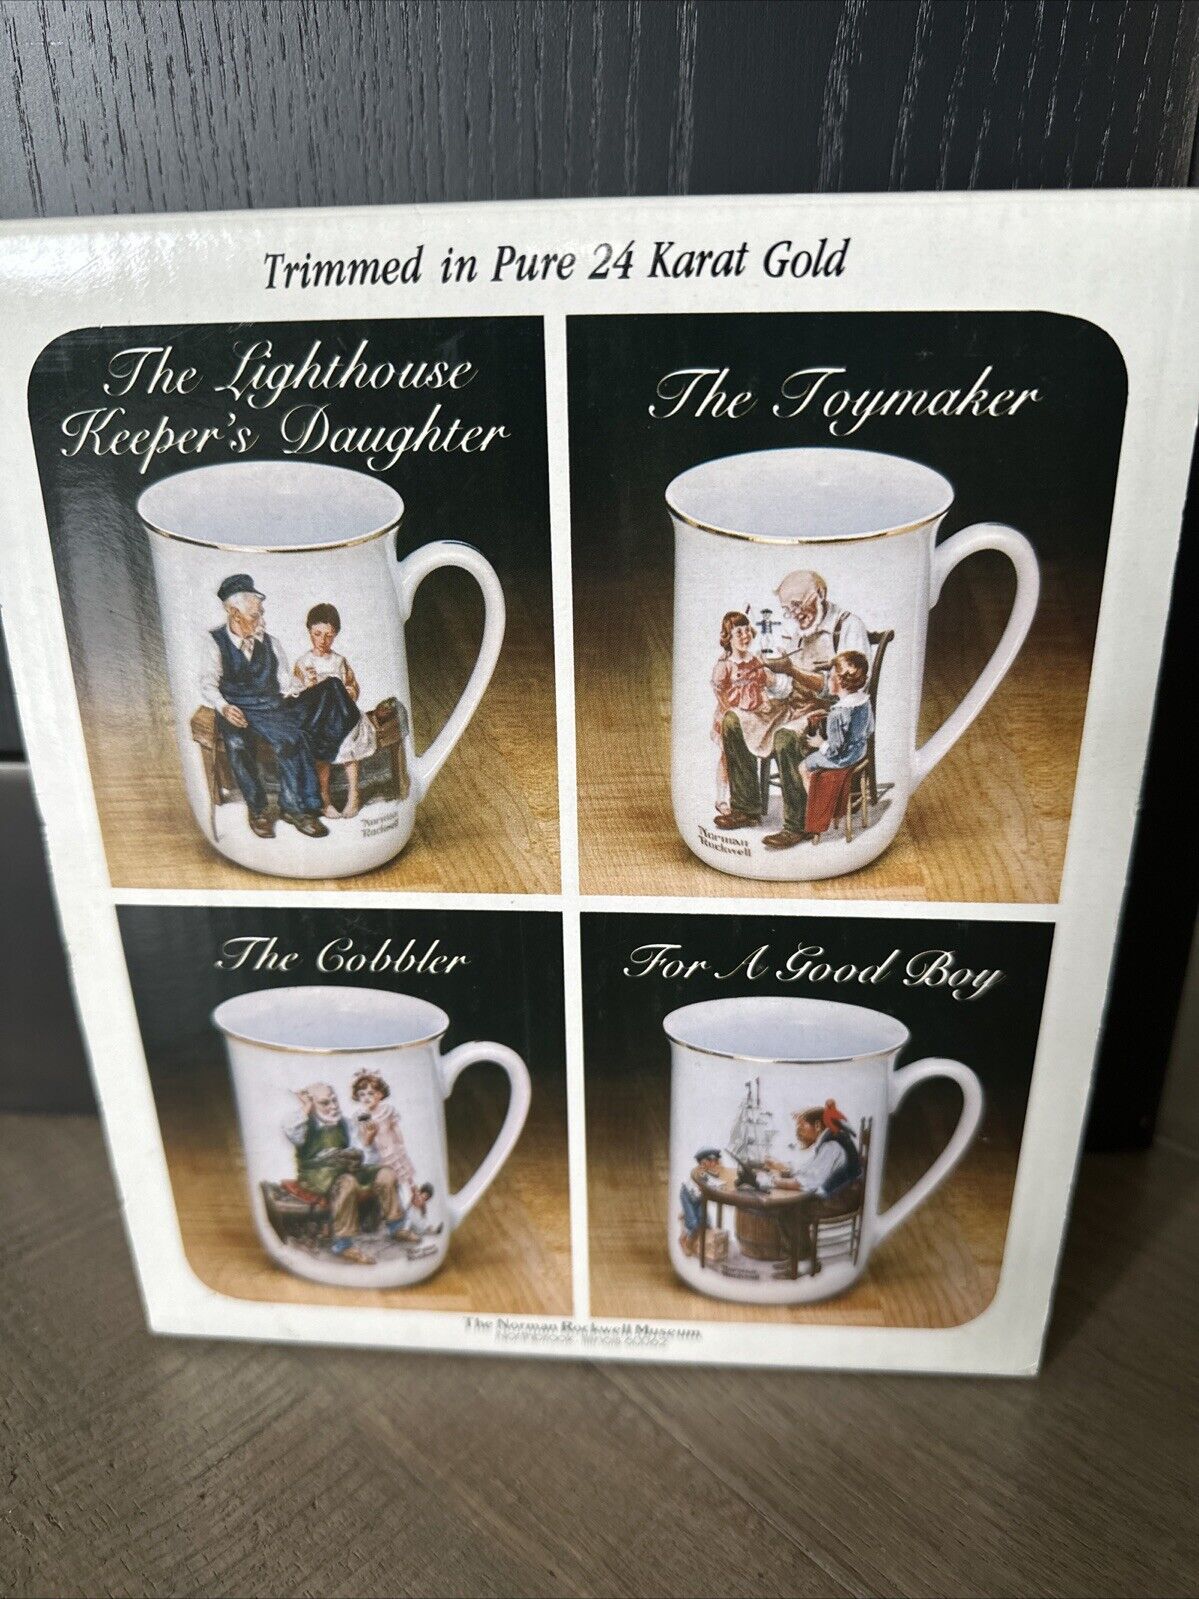 1982 Norman Rockwell Museum Coffee Mugs Cups White/Gold Trim Set of 4. New